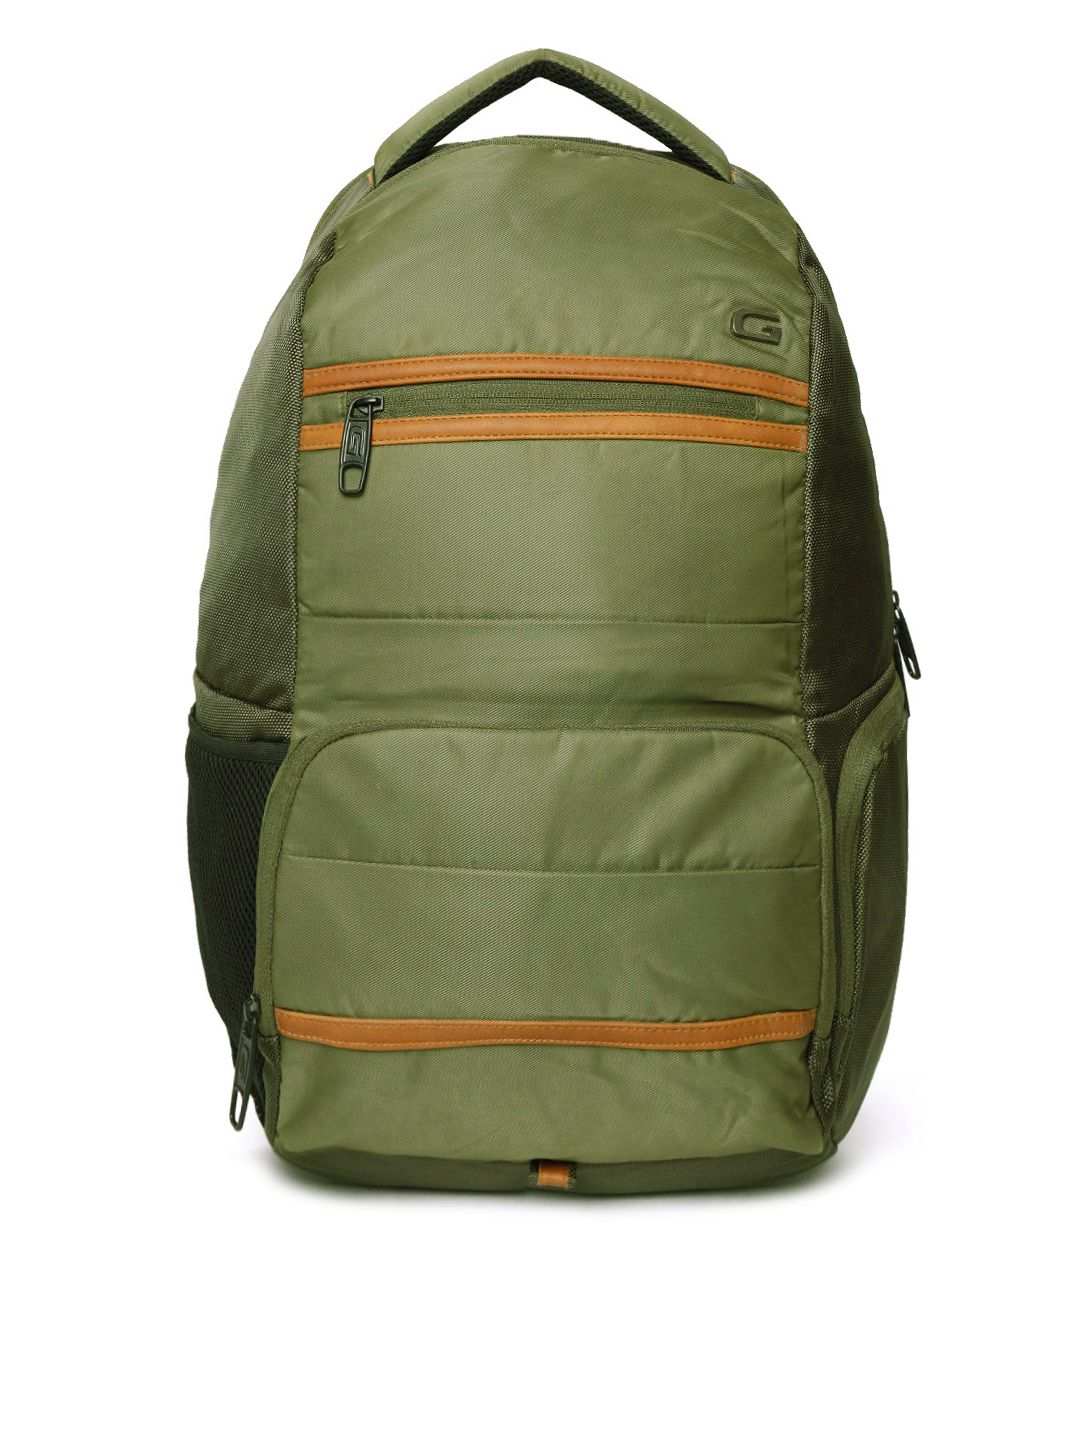 Gear Unisex Olive Green Solid Backpack Price in India